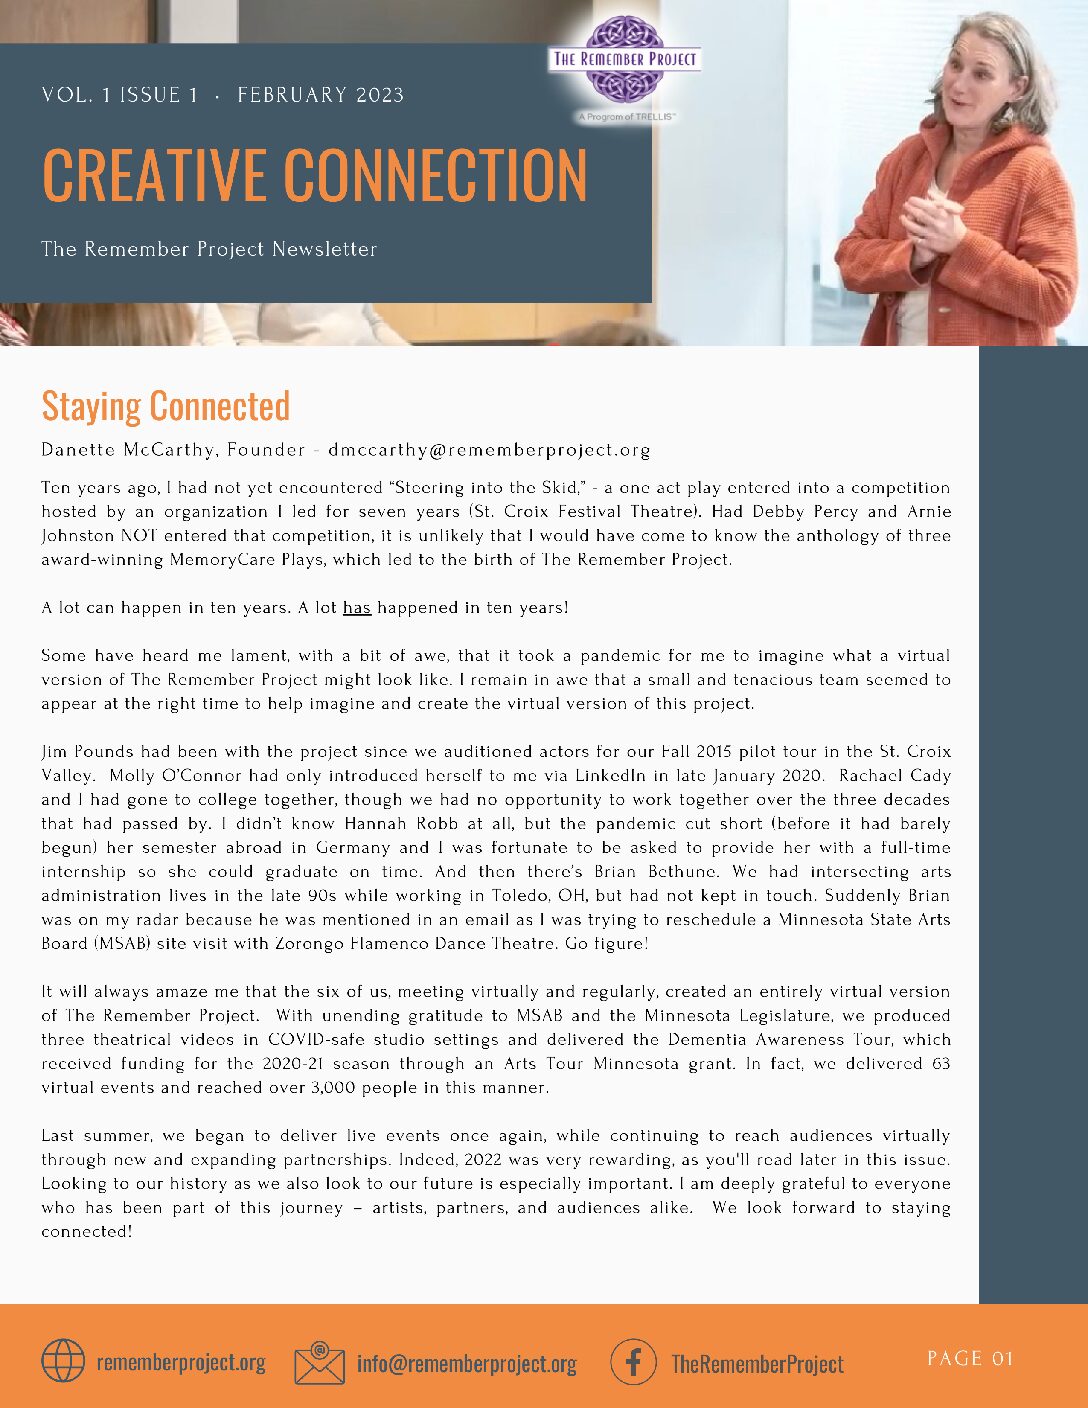 Creative Connections newsletter